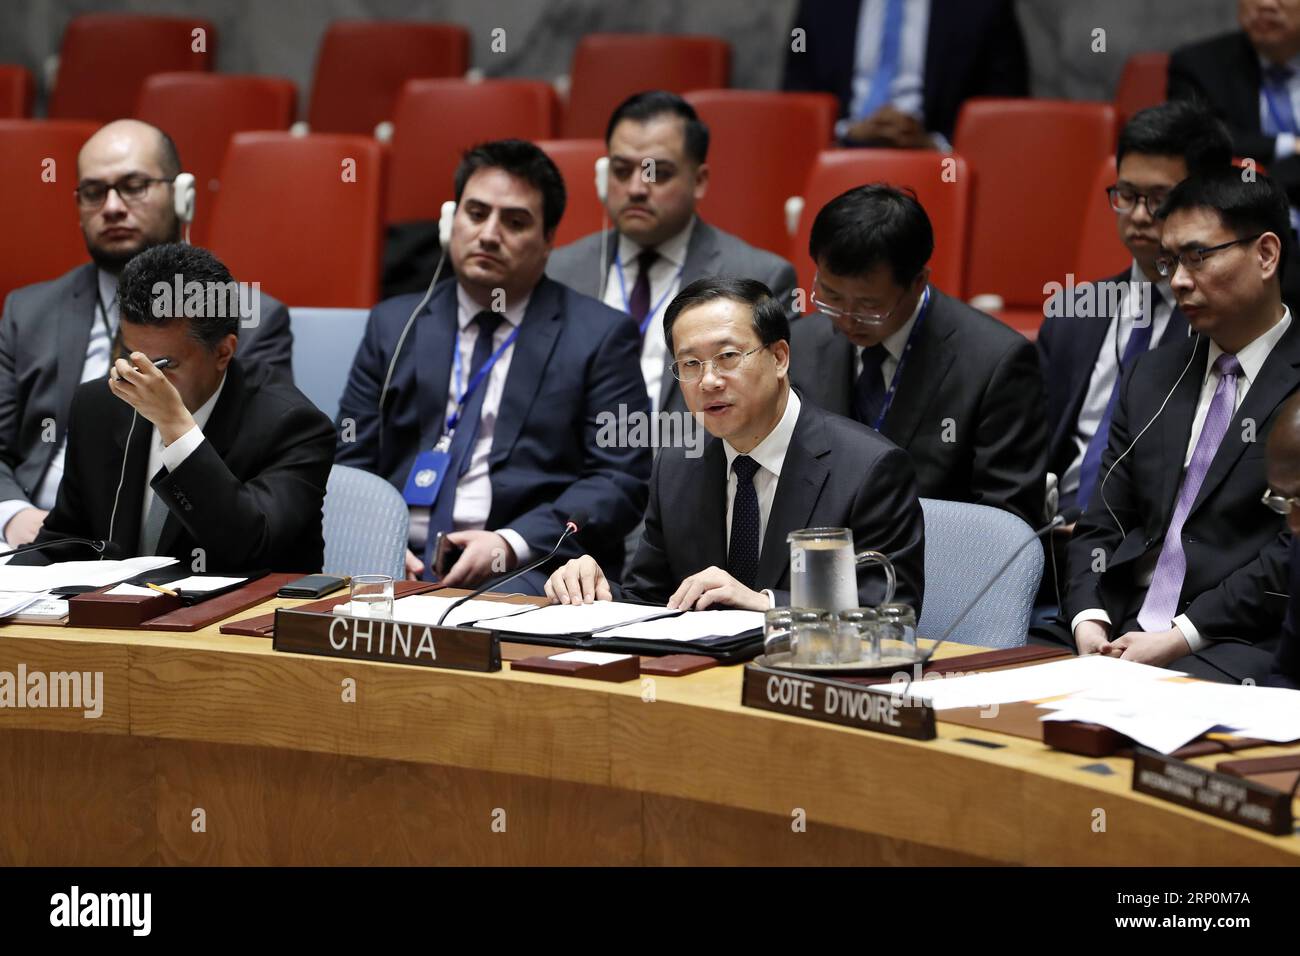 (180519) -- UNITED NATIONS, May 19, 2018 -- Chinese ambassador to the United Nations (UN) Ma Zhaoxu (1st R, front) speaks at the UN Security Council high-level open debate on upholding international law for world peace and security, at the UN headquarters in New York, on May 17, 2018. While concerns about the authority and mandated duties of the UN Security Council were raised at a high-level open debate on Thursday, China threw its considerable weight behind it, one of the six UN principal organs for maintaining international peace and security. ) (sxk) UN-SECURITY COUNCIL-MEETING-INTERNATION Stock Photo